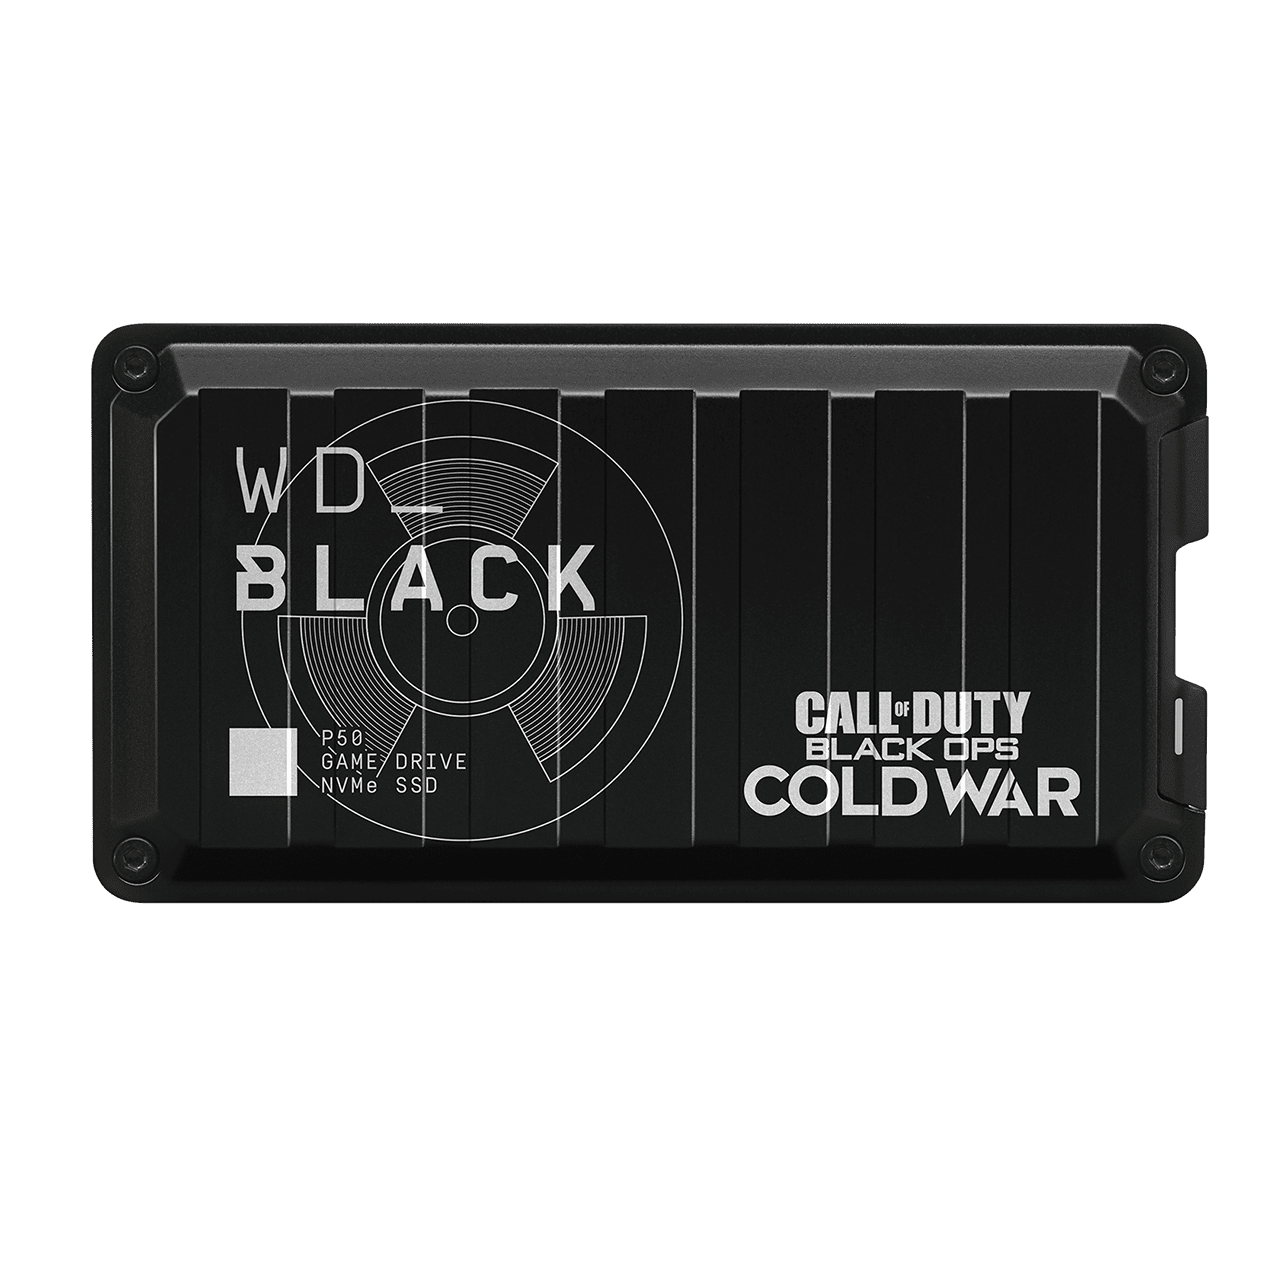 wd-black-p50-game-drive-call-of-duty-edition-usb-3-2-ssd-front.png.thumb.1280.1280.png